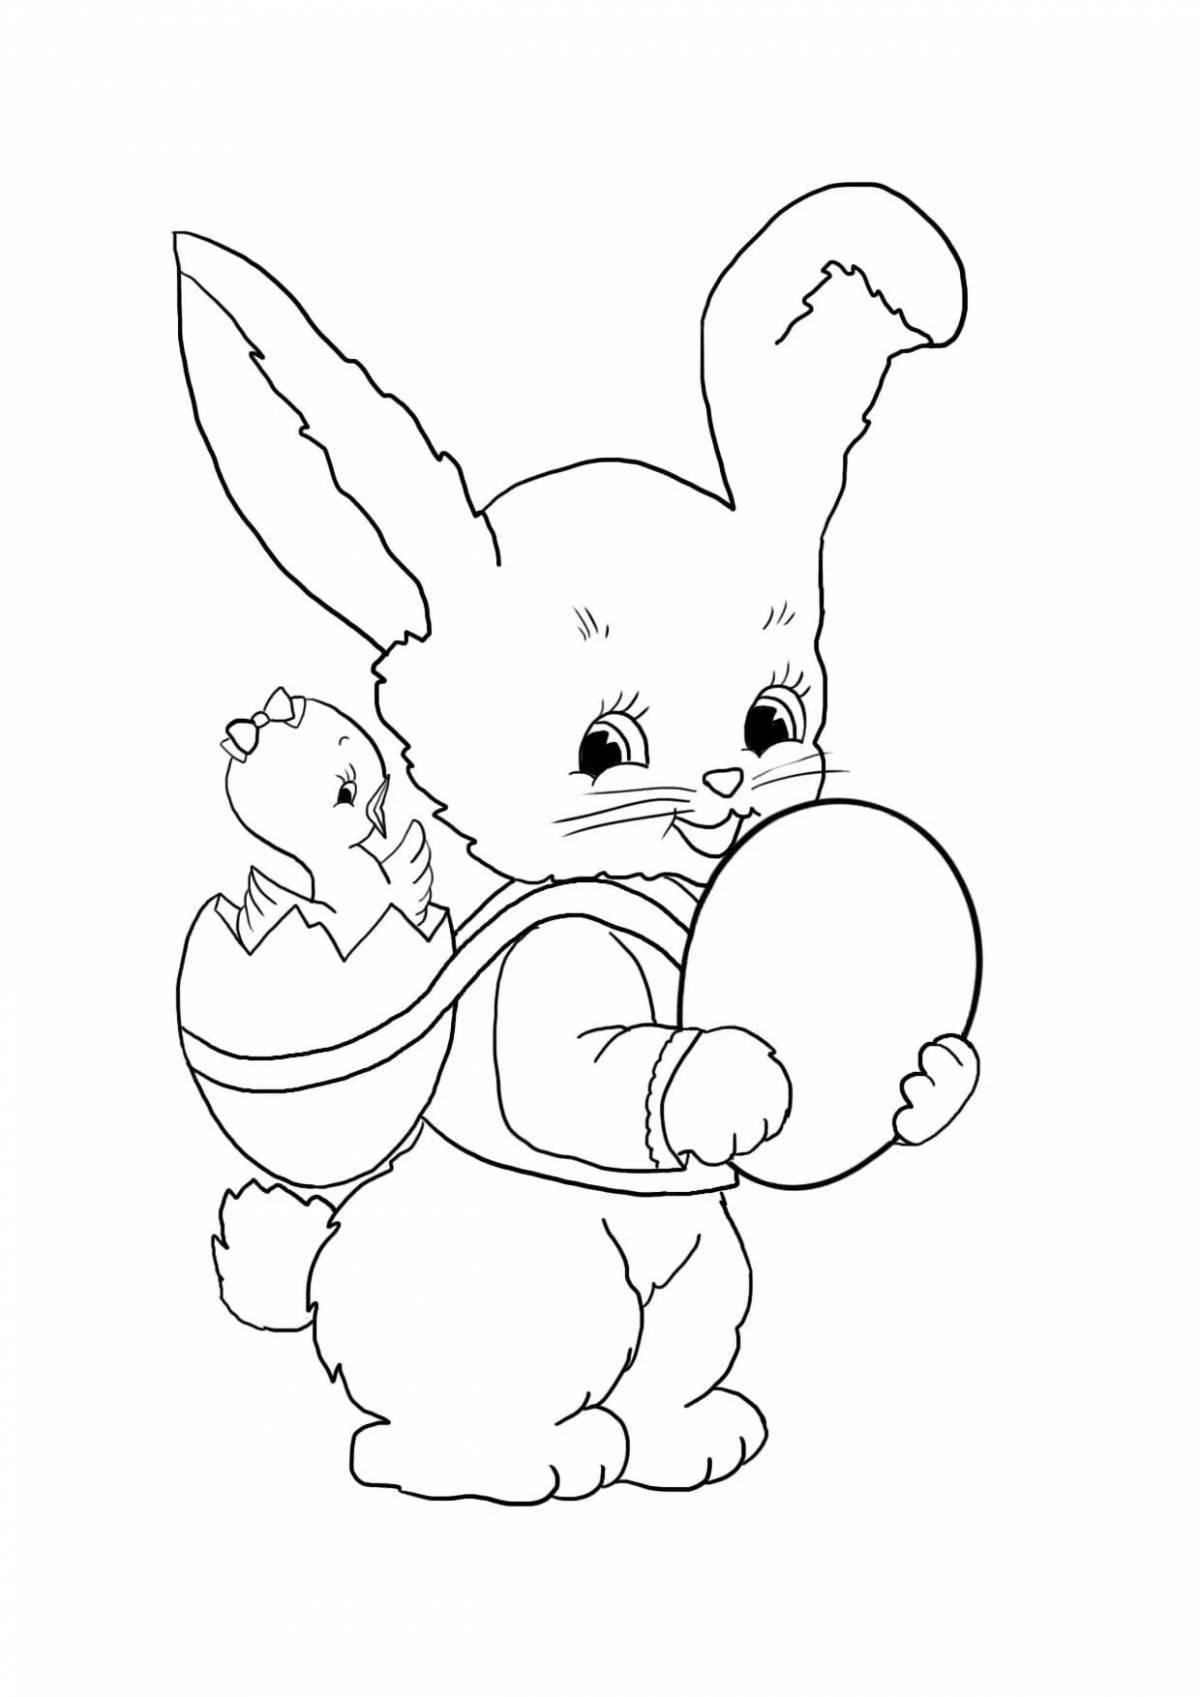 Shiny Easter Bunny coloring book